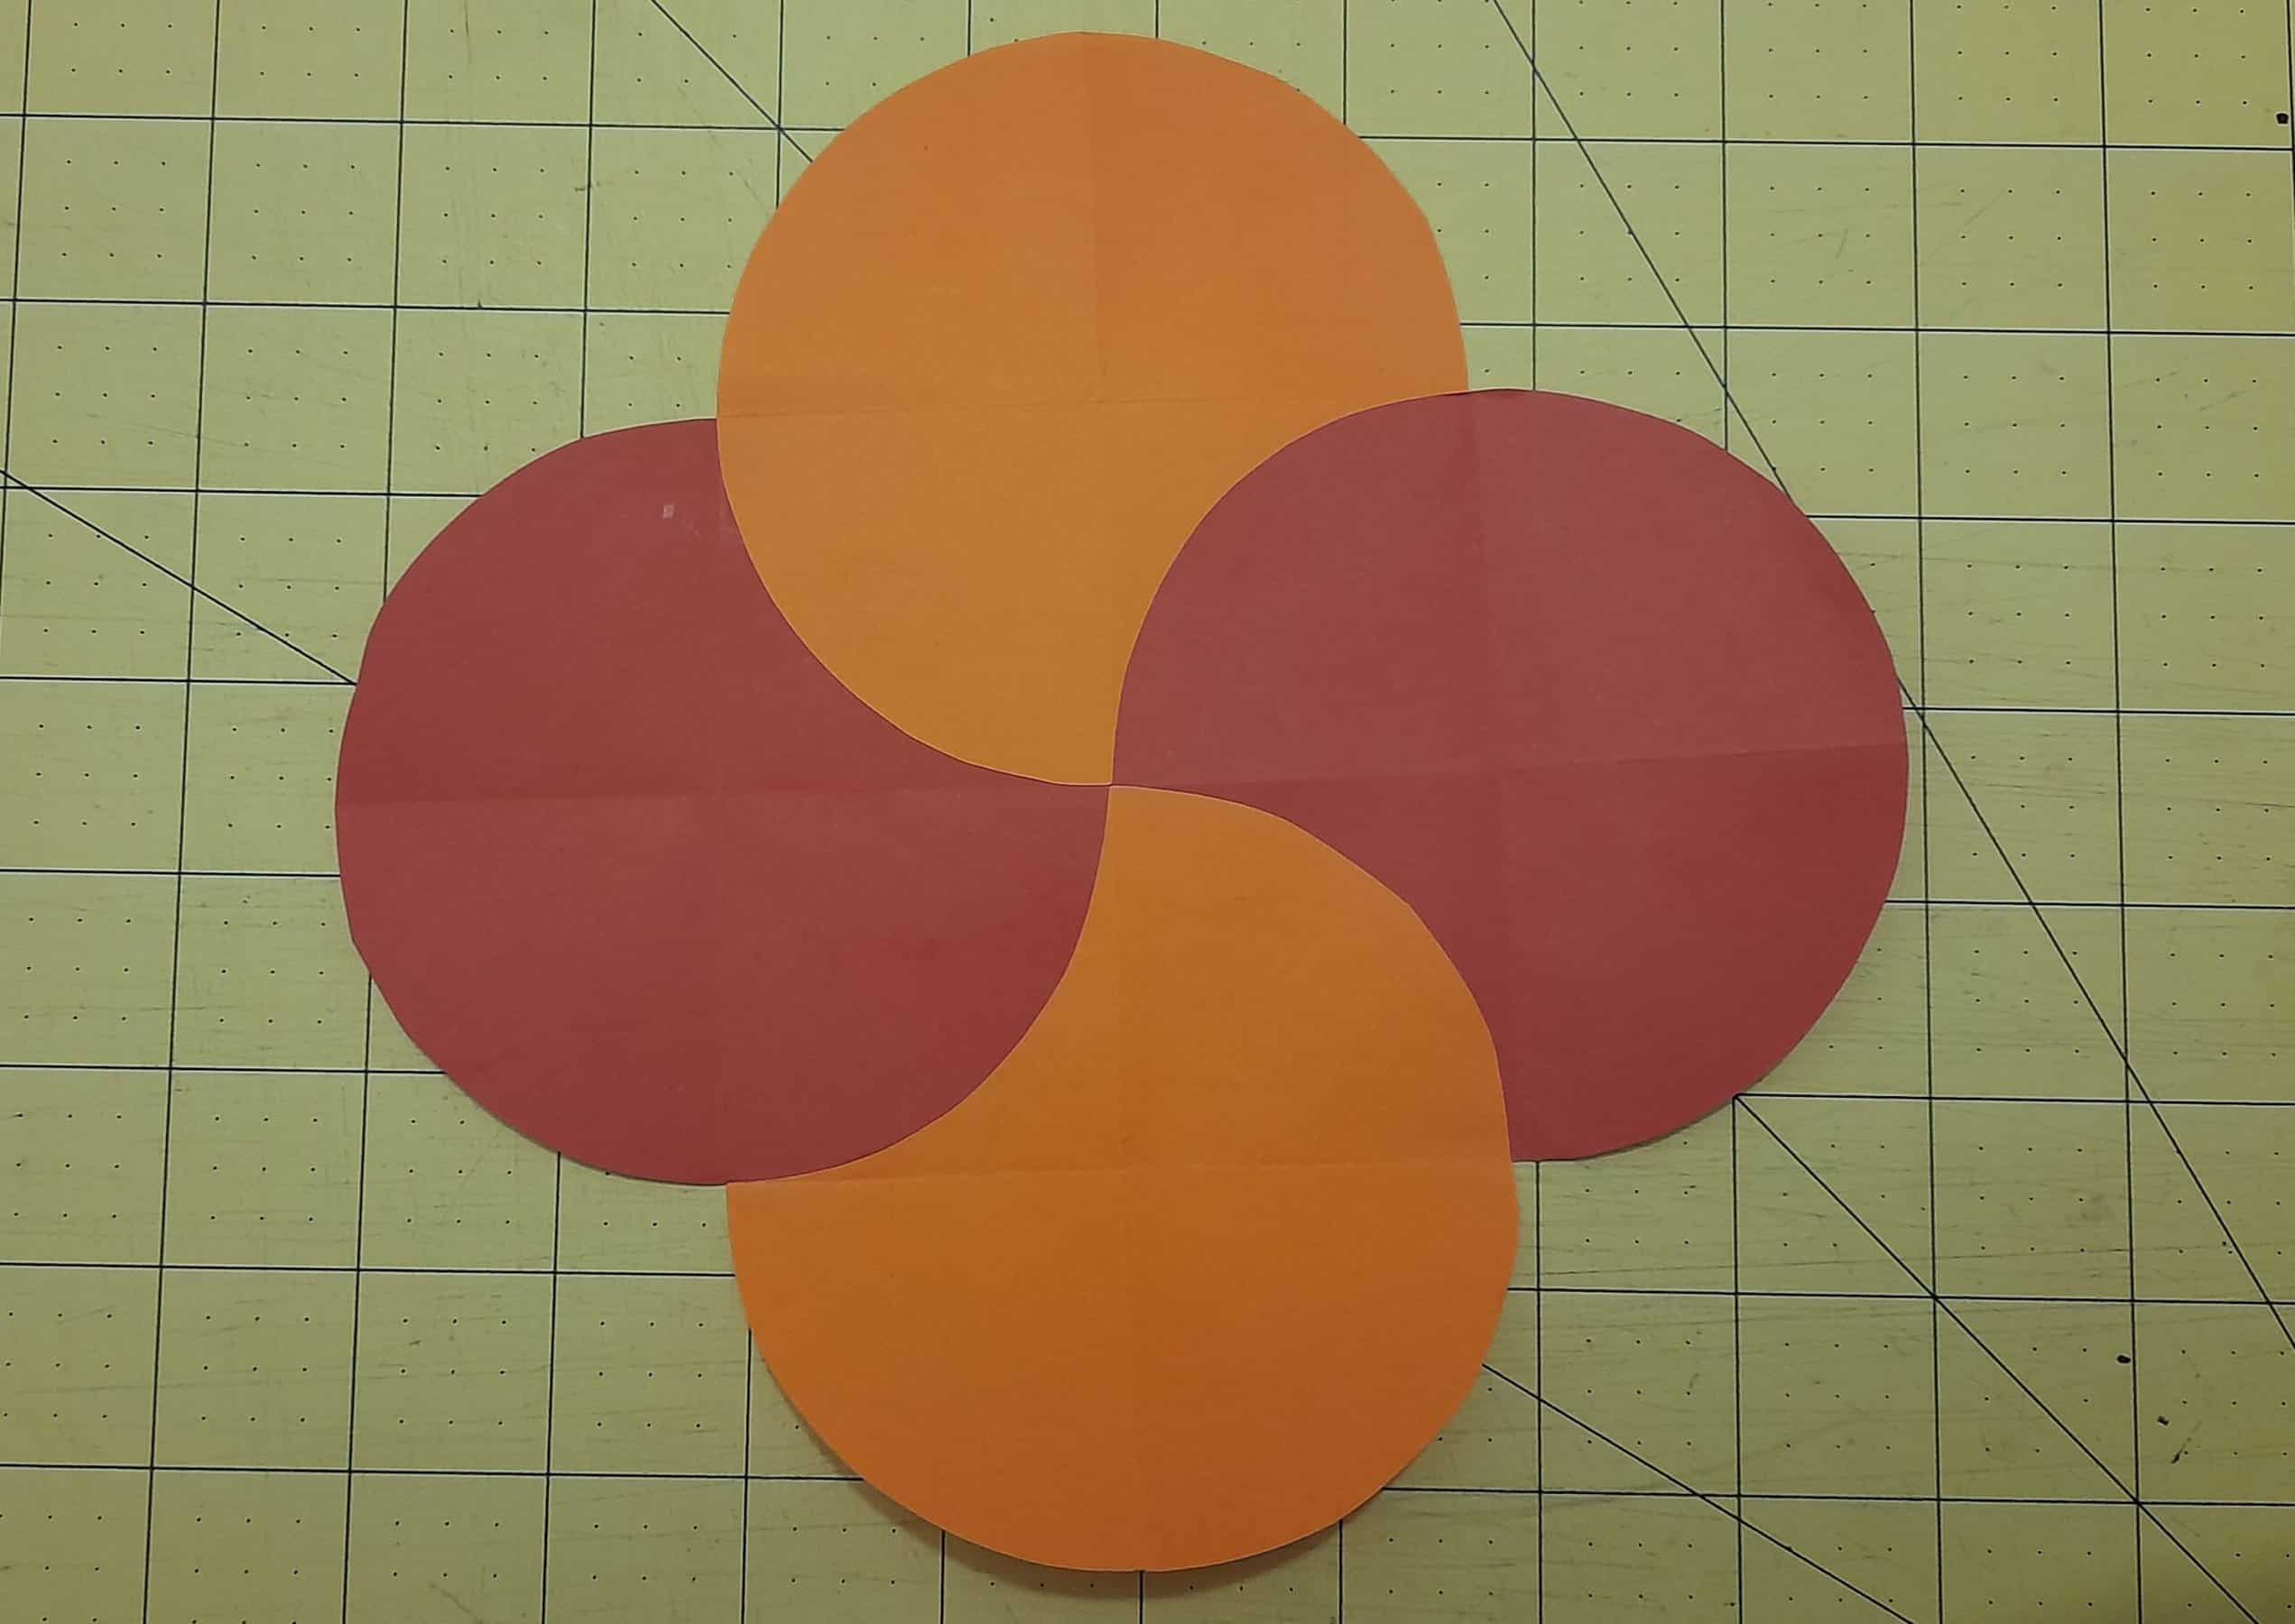 Pi Day Craft – How To Make a Square Envelope Out of Circles